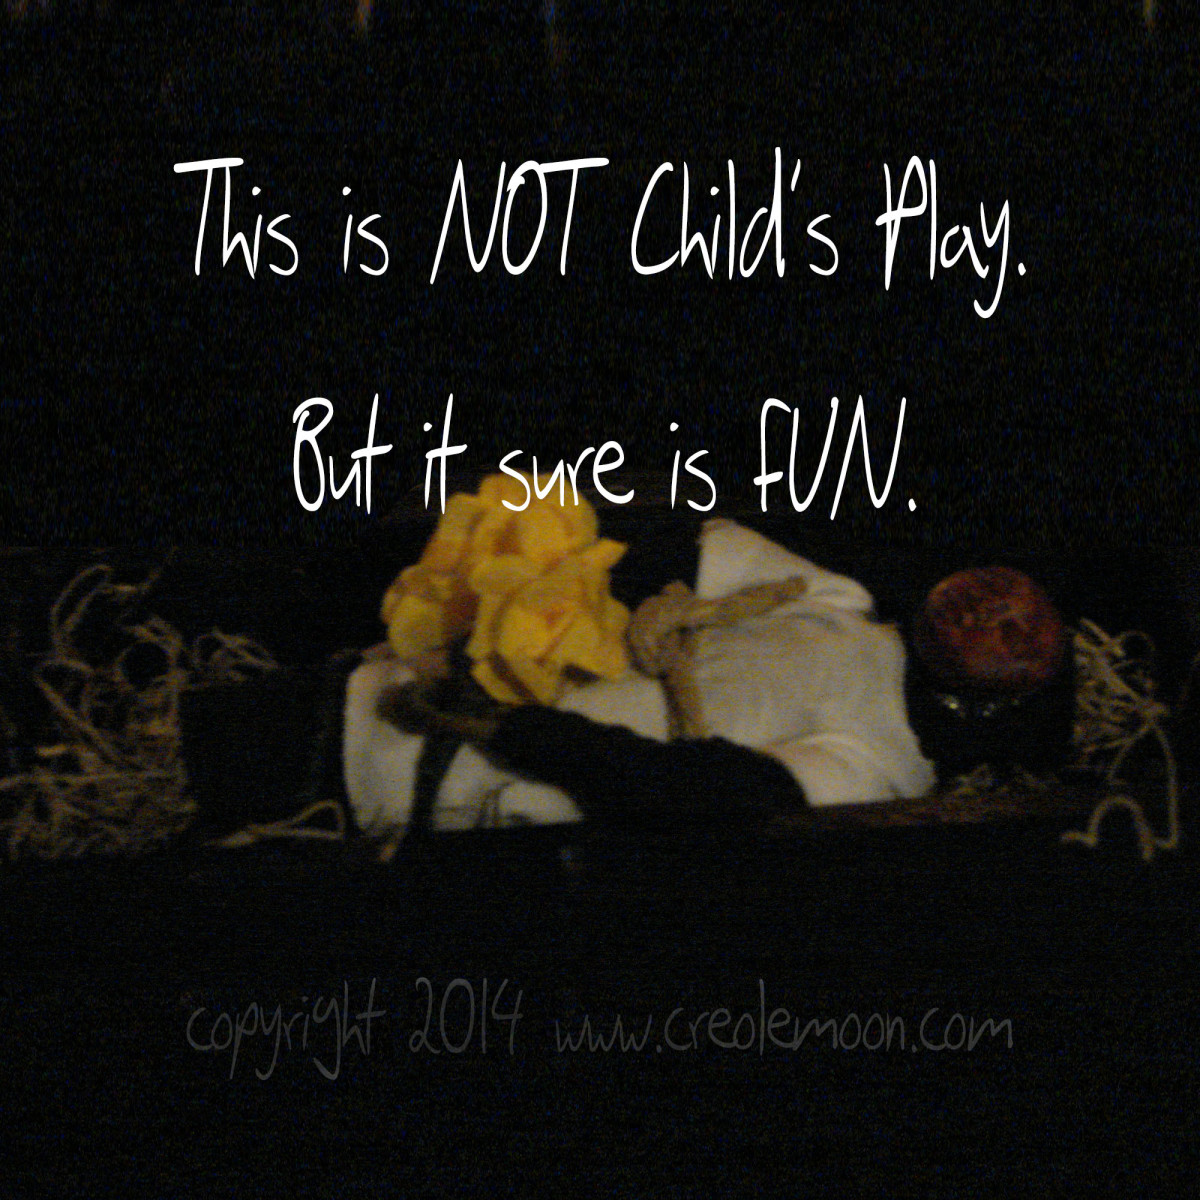 This is not child's play. Photo copyright 2014 Denise Alvarado, All rights reserved worldwide.